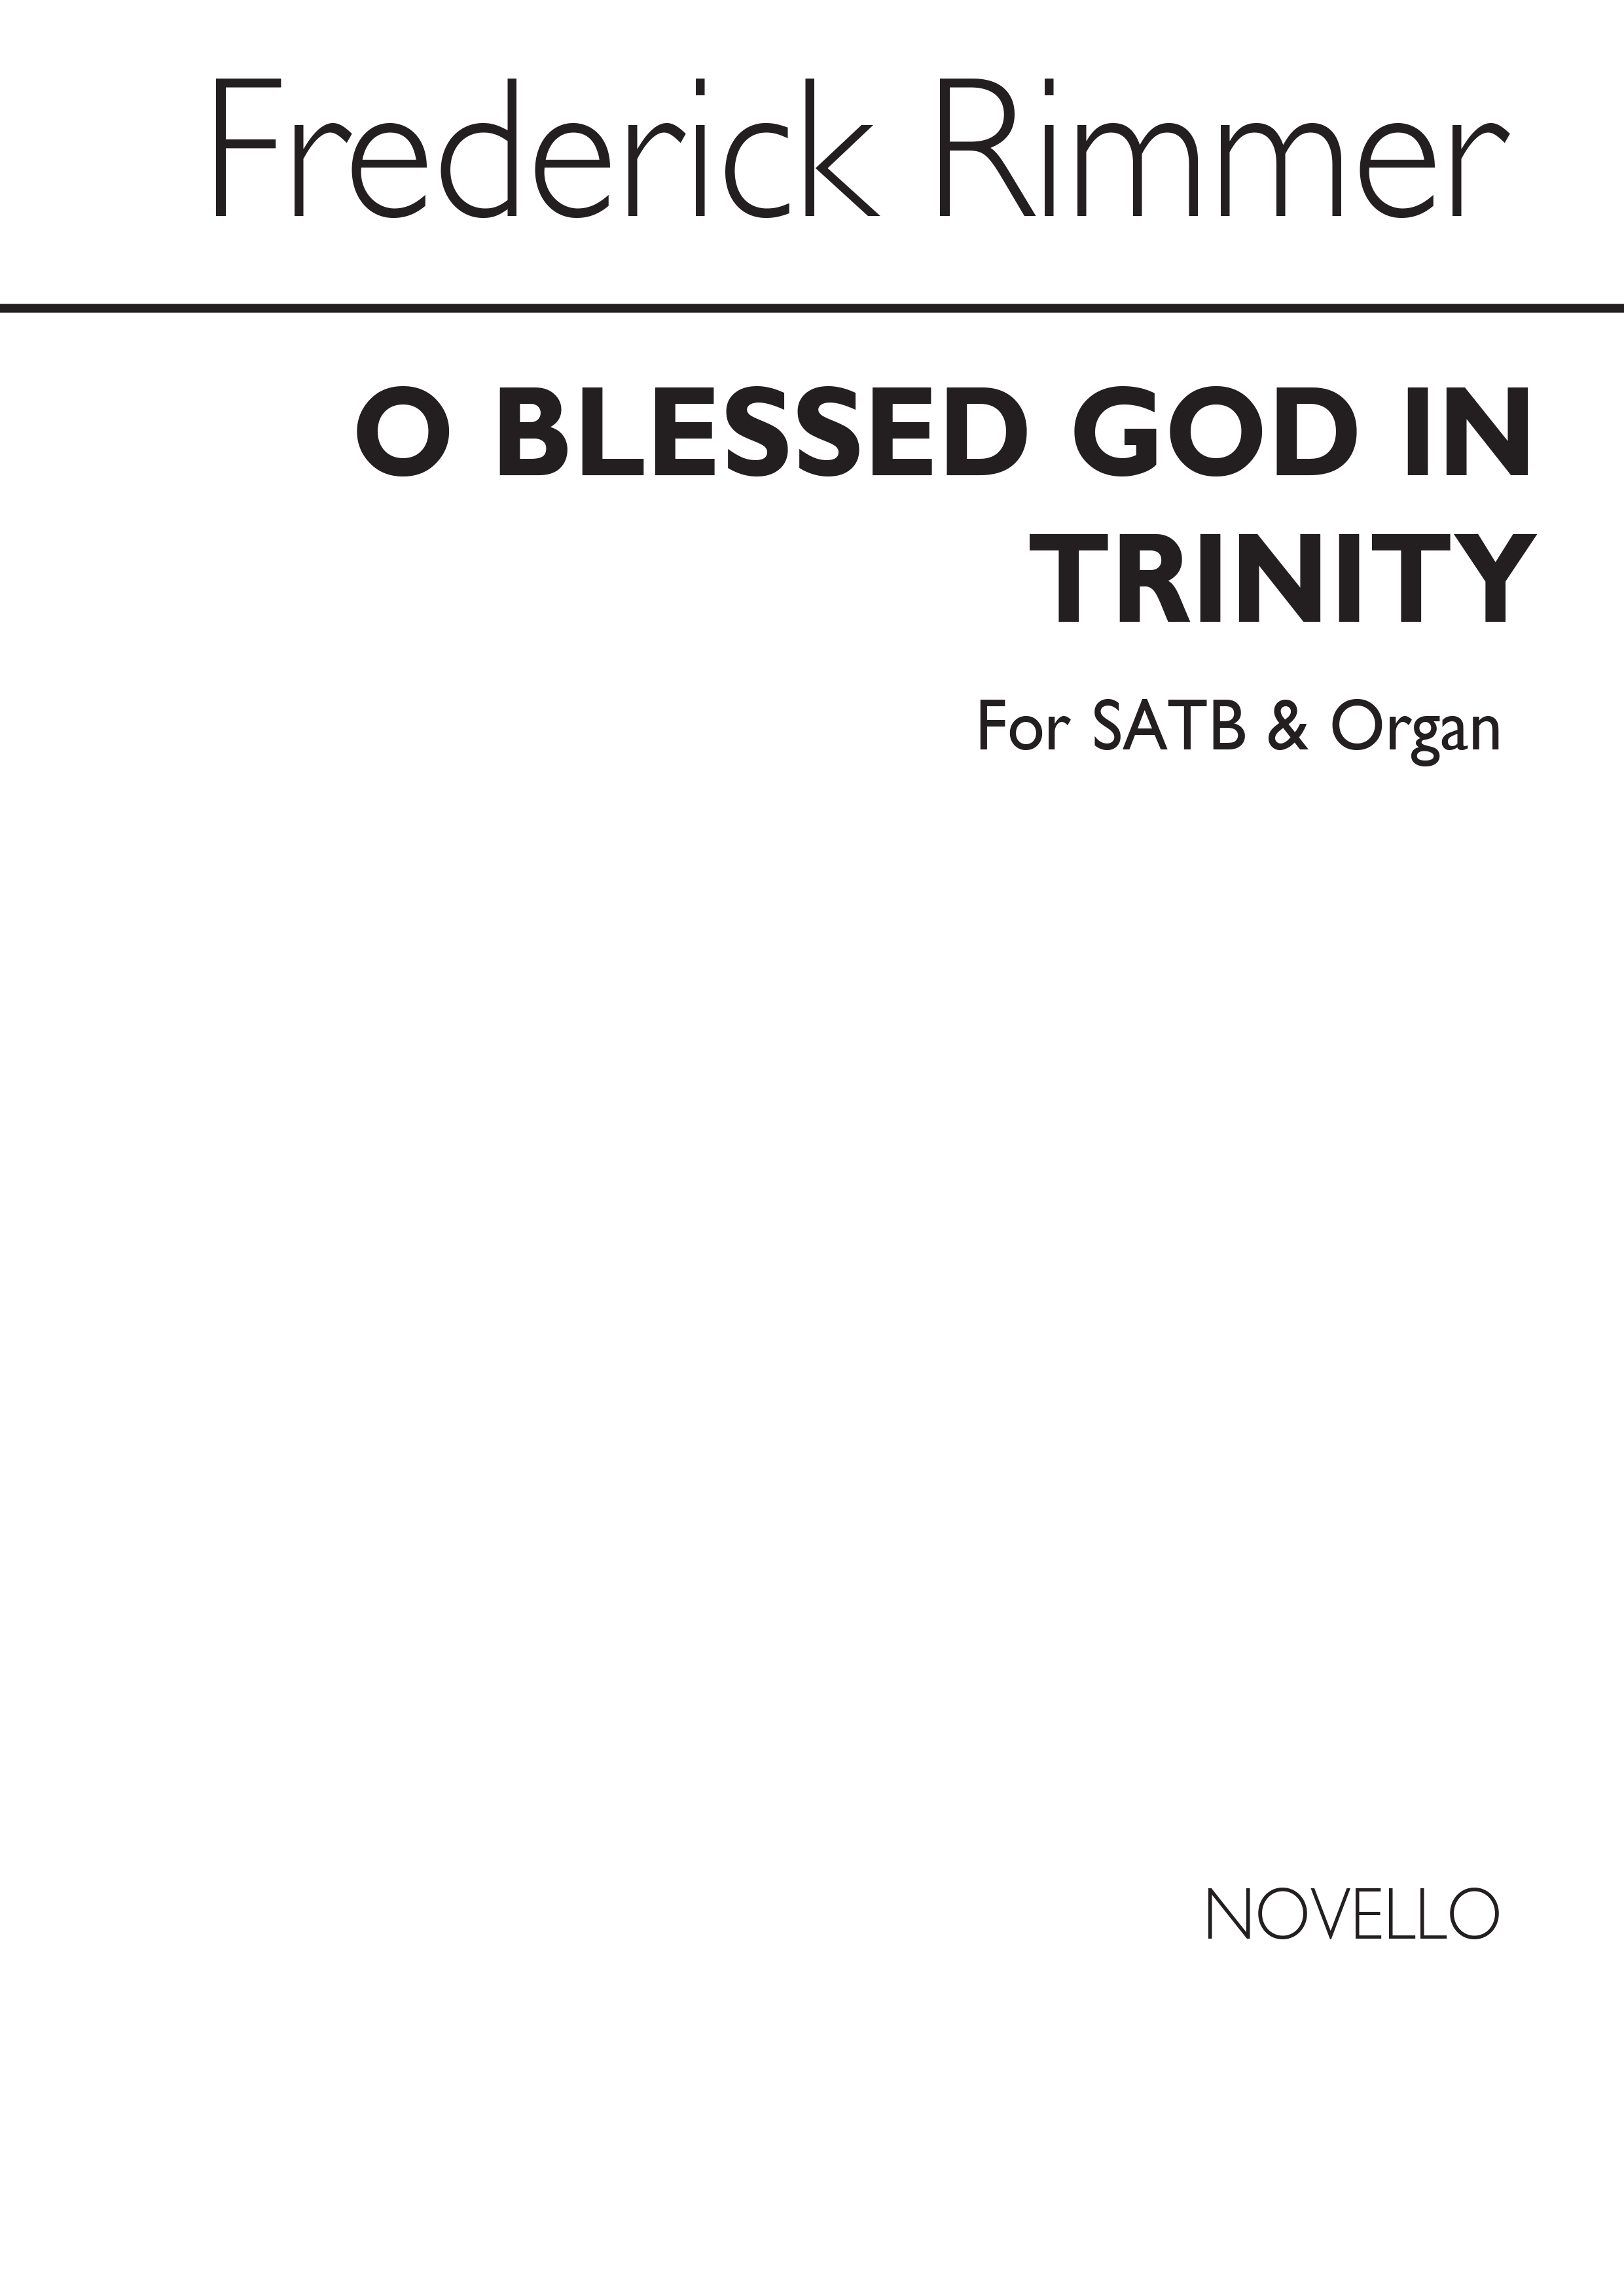 Rimmer: O Blessed God In Trinity for SATB Chorus